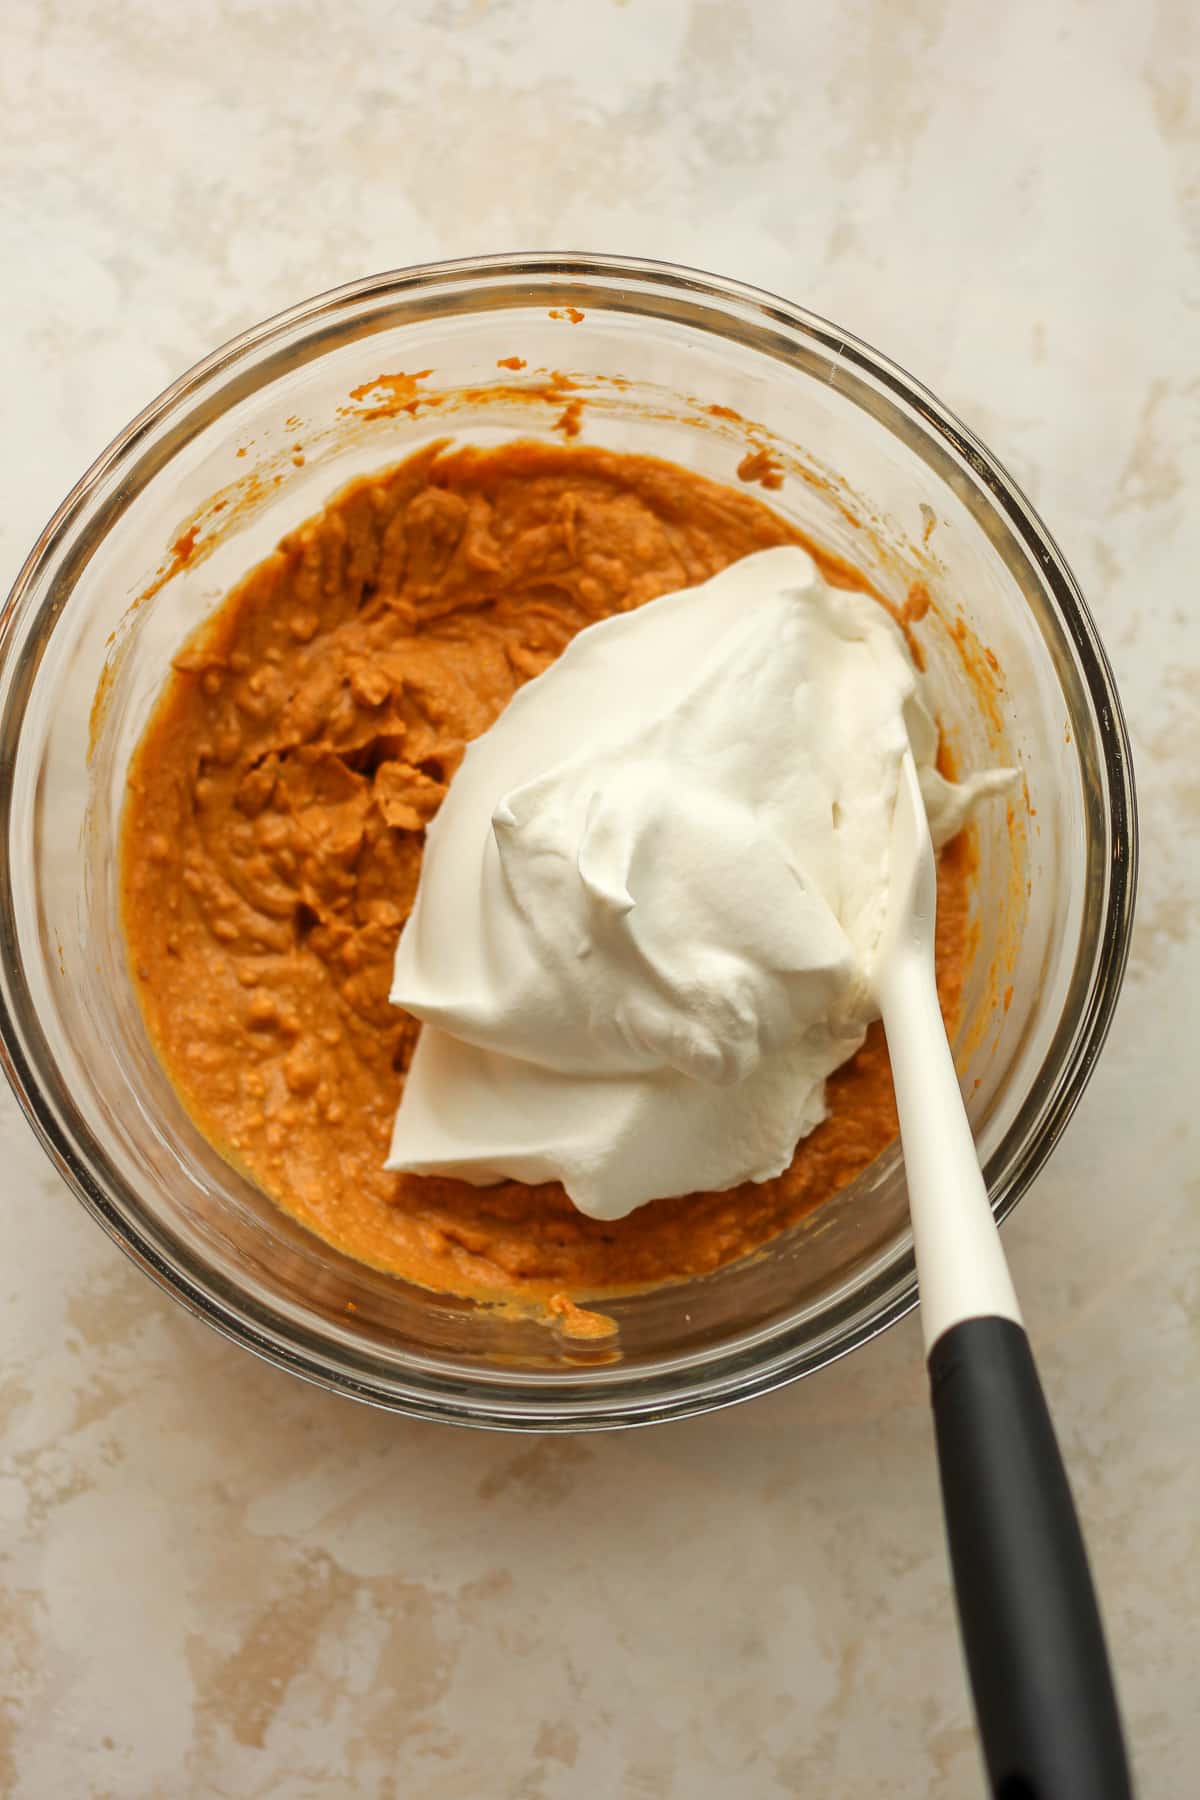 A bowl of the pumpkin mixture with cool whip on top.